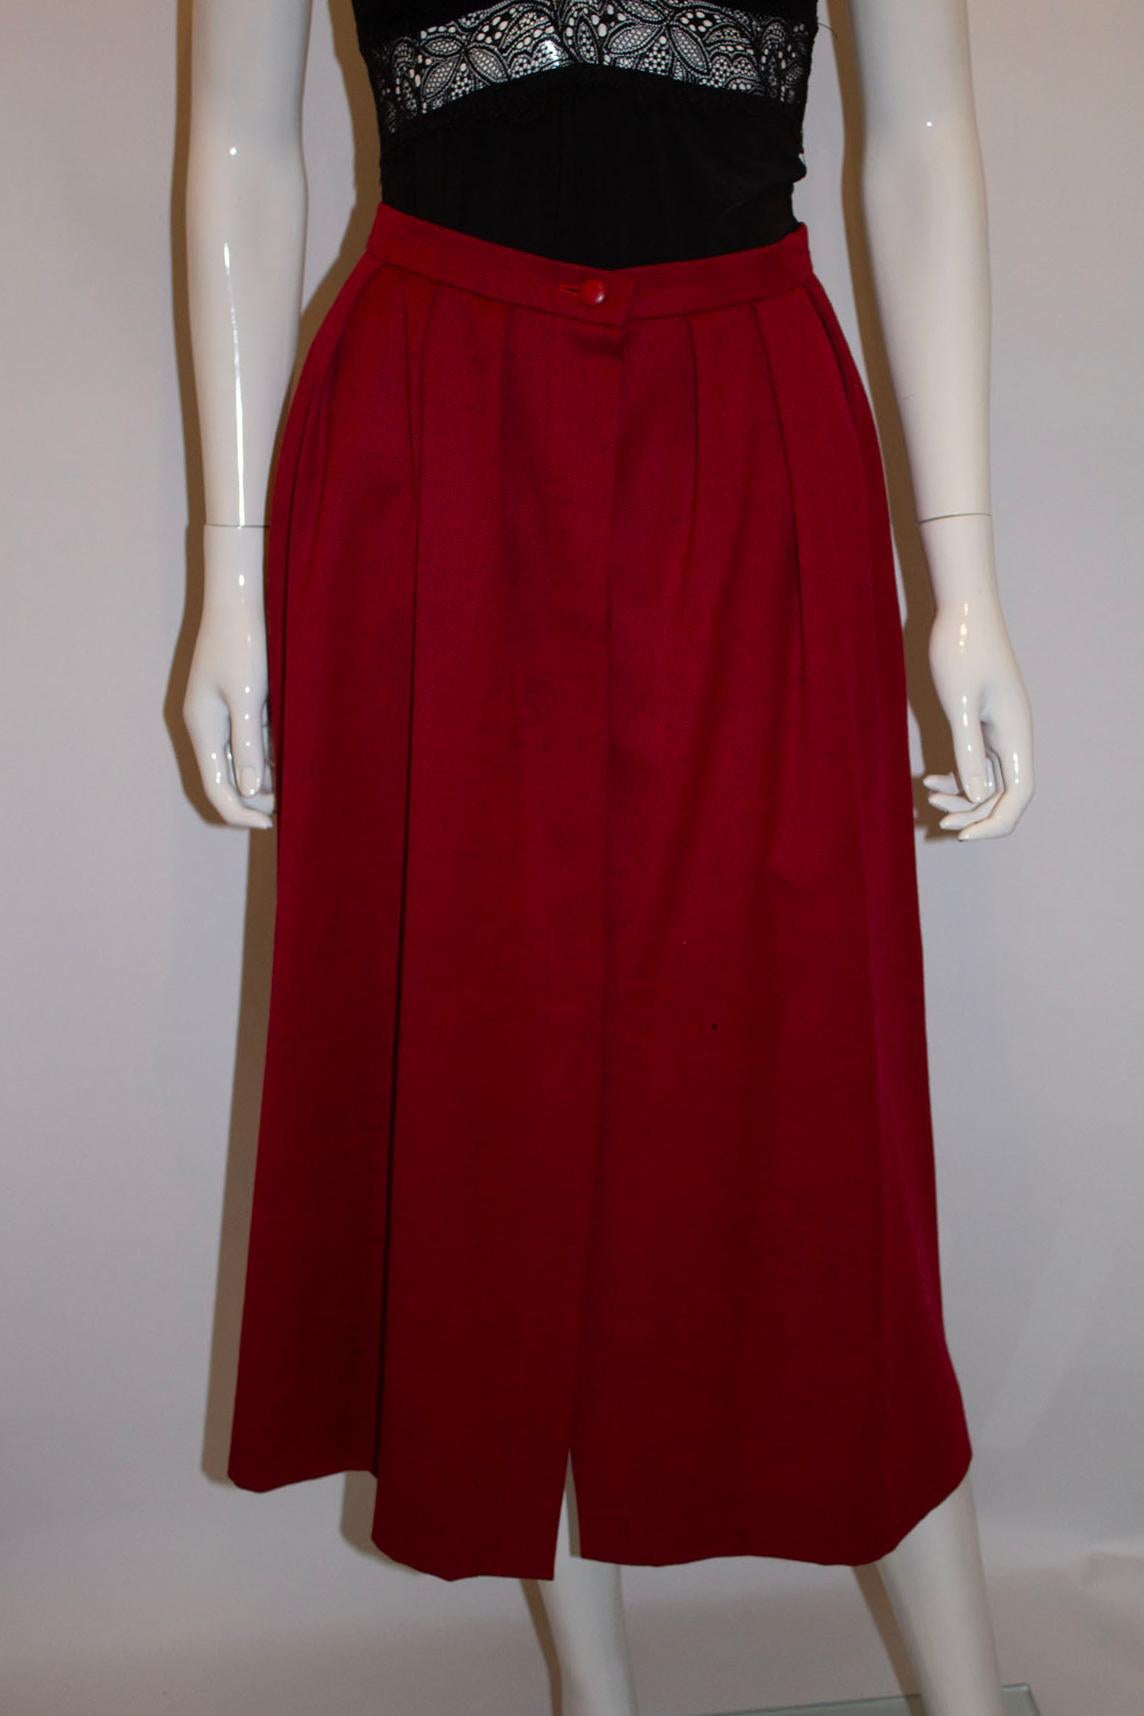 Women's Vintage Christian Dior Red Wool Skirt For Sale